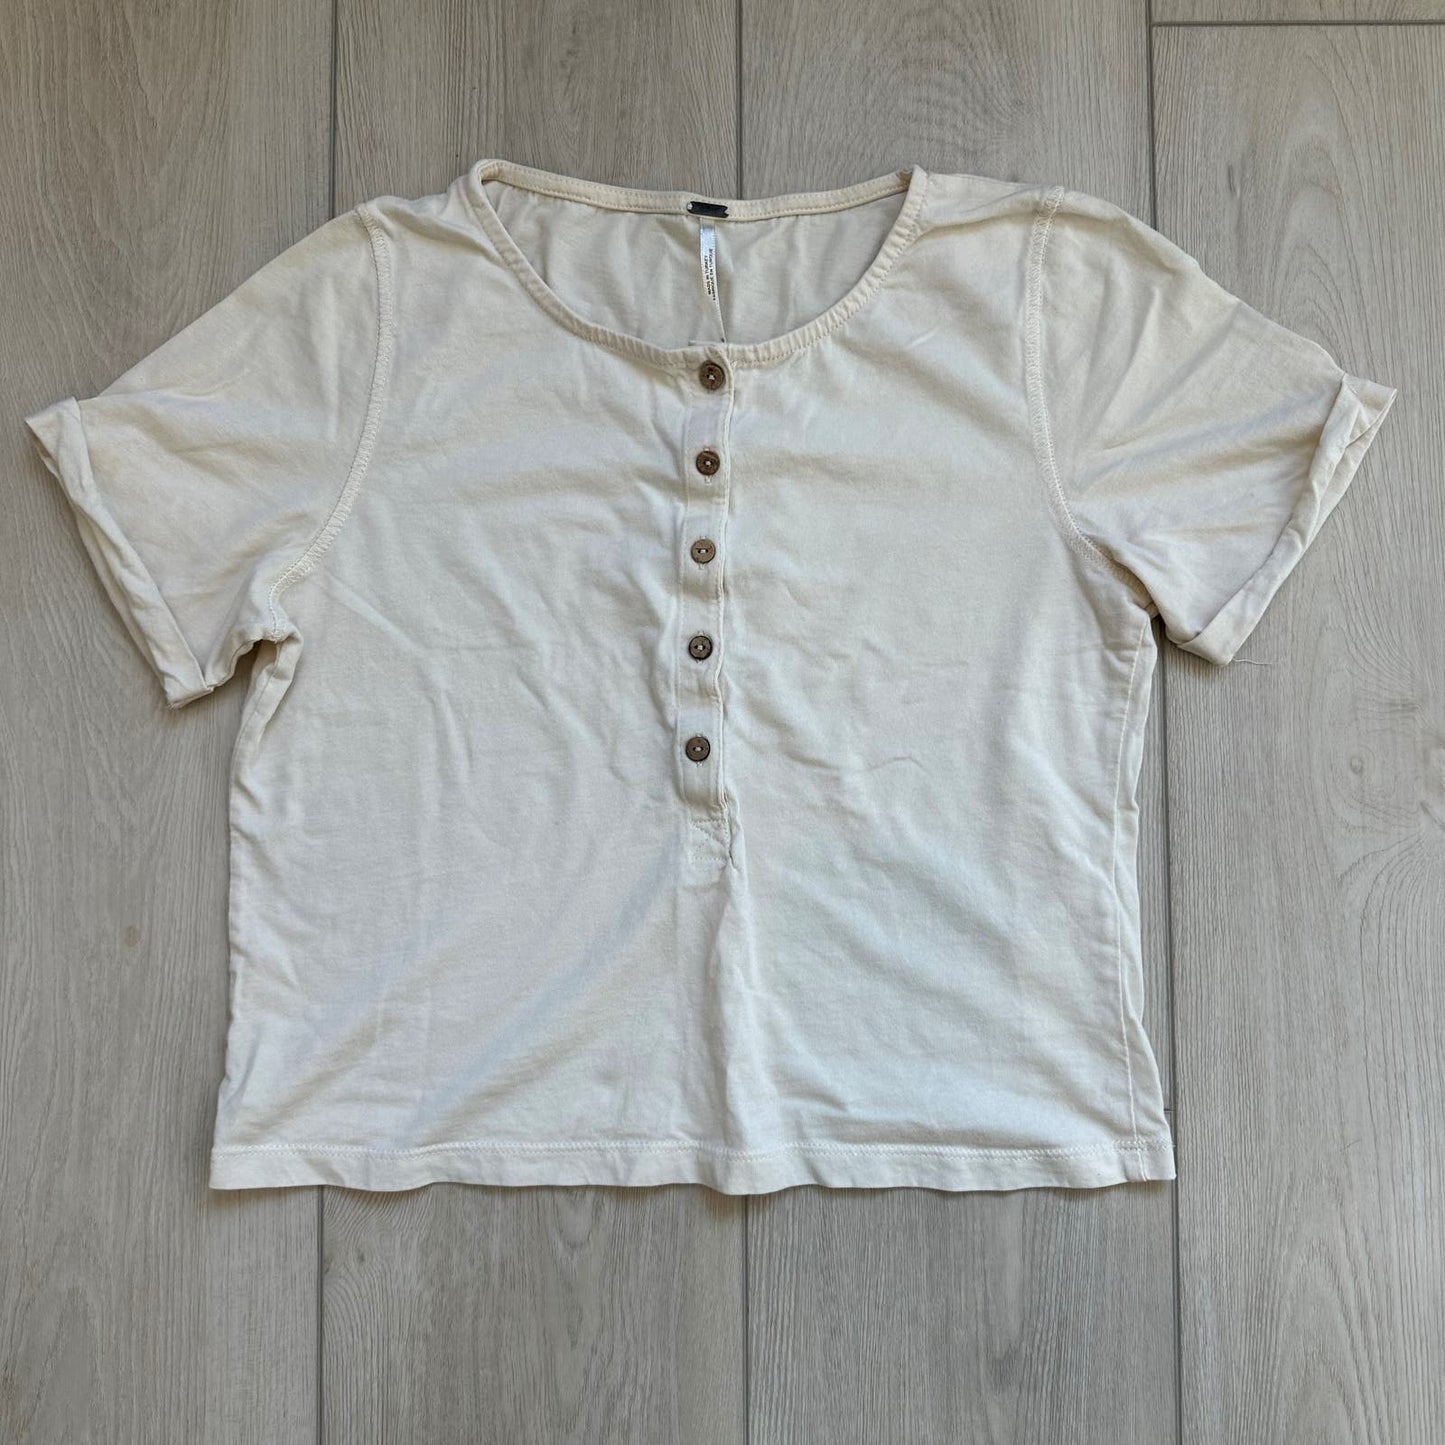 Free People What's Up Henley cream cropped short sleeve button up shirt